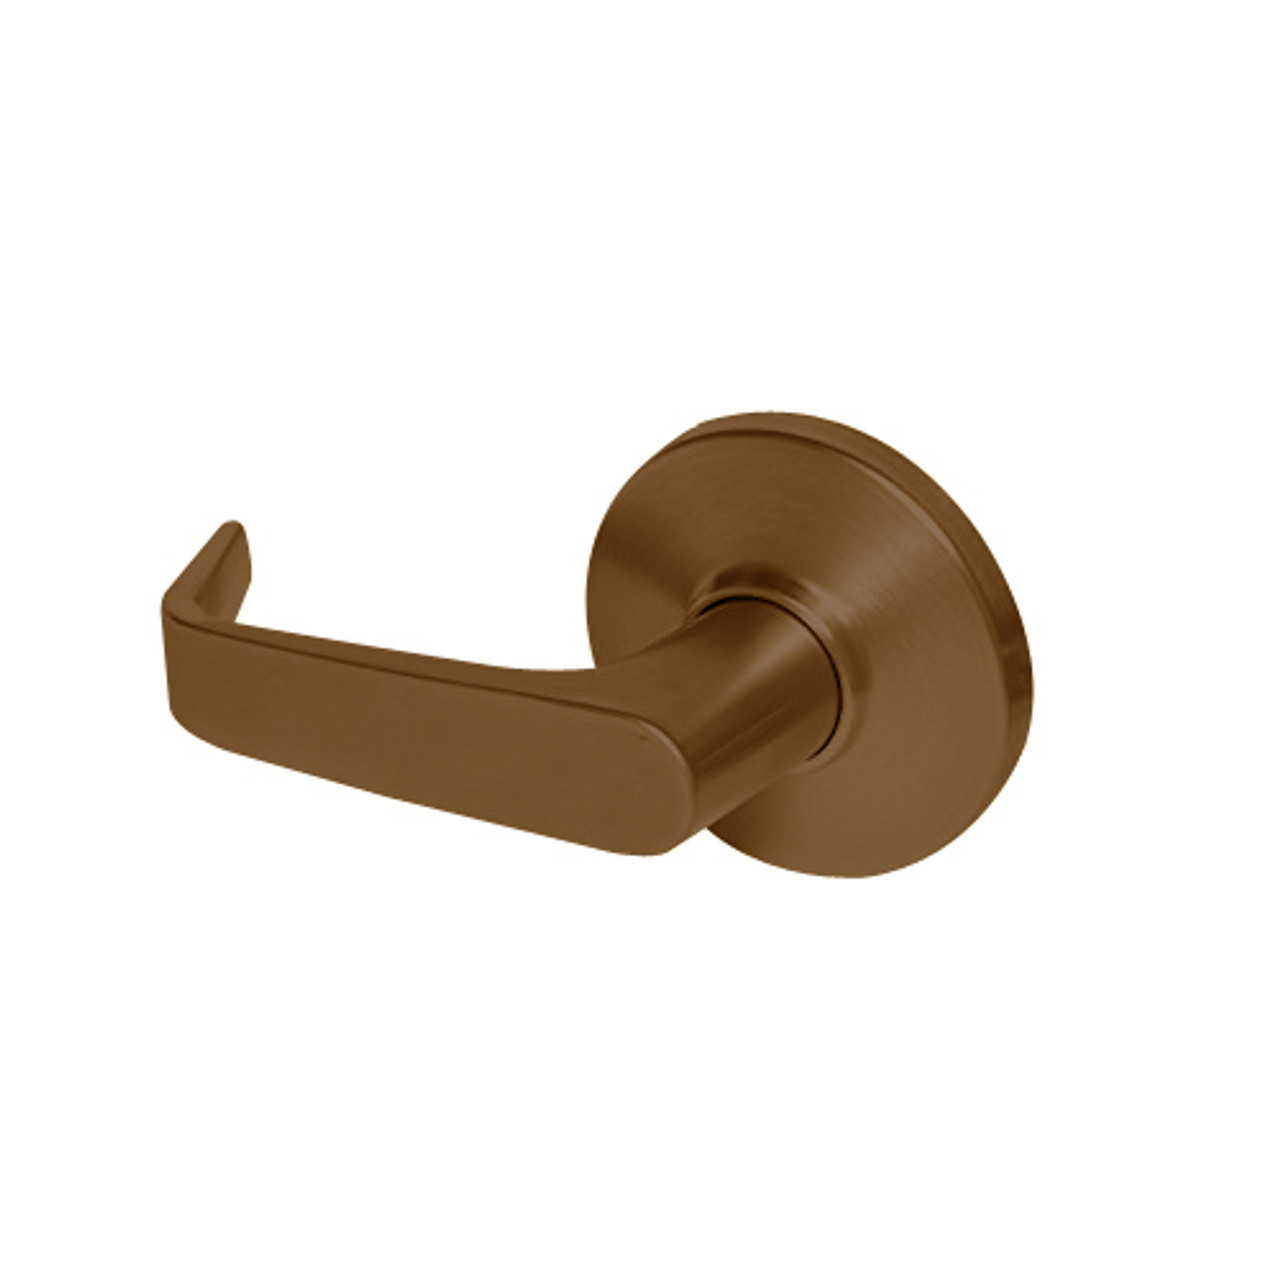 9K50N15DS3690LM Best 9K Series Passage Heavy Duty Cylindrical Lever Locks with Contour Angle with Return Lever Design in Dark Bronze